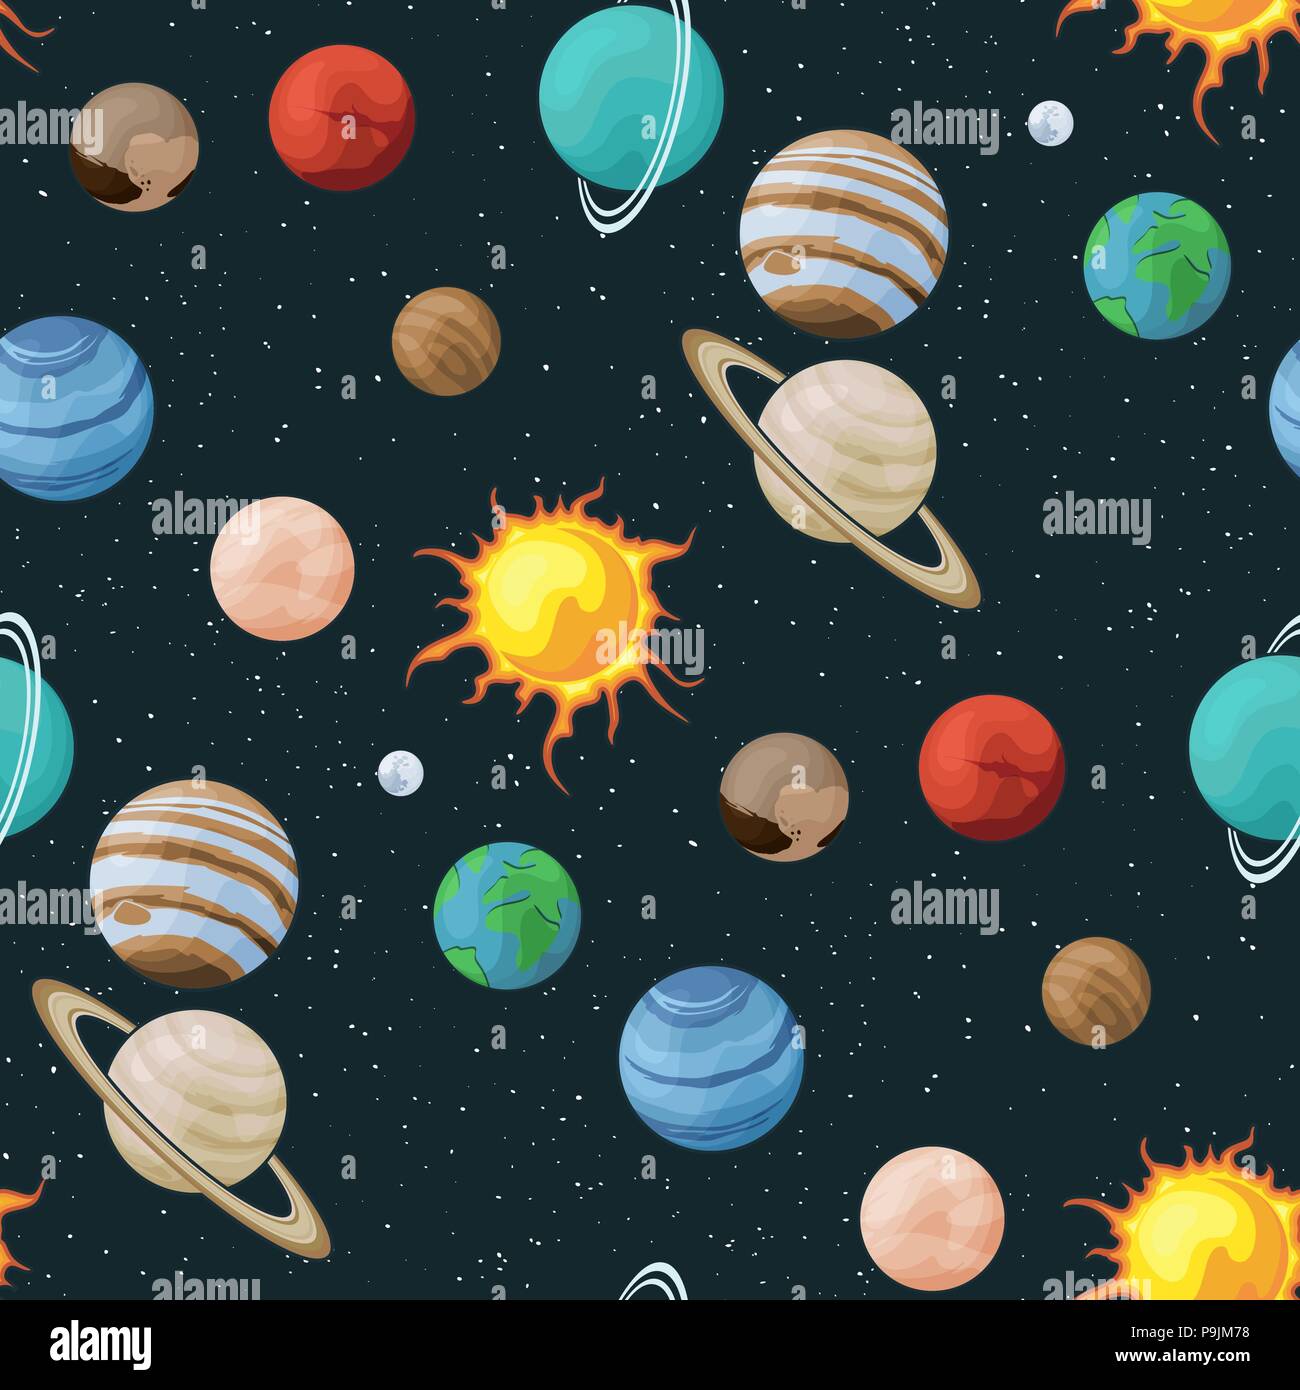 Solar system vector seamless pattern of planets in space universe texture Stock Vector